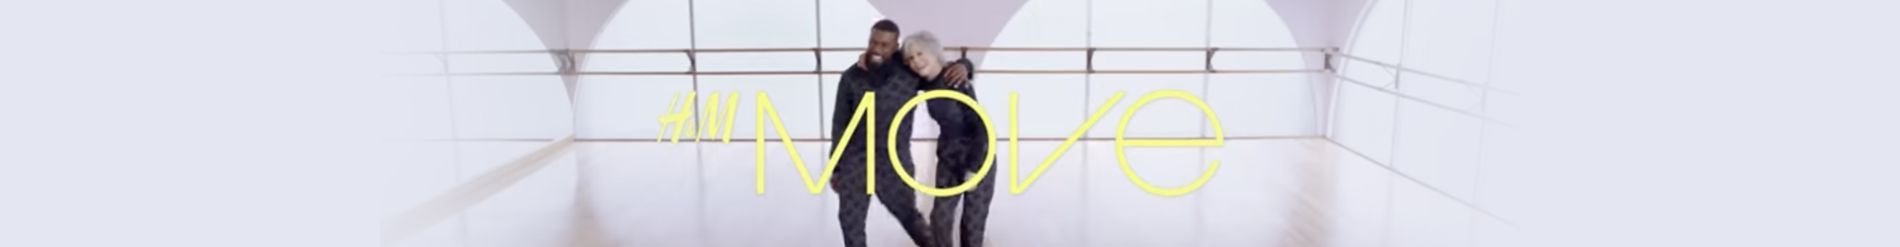 'Move It' By Jaded in H&M Move campaign starring Jane Fonda!